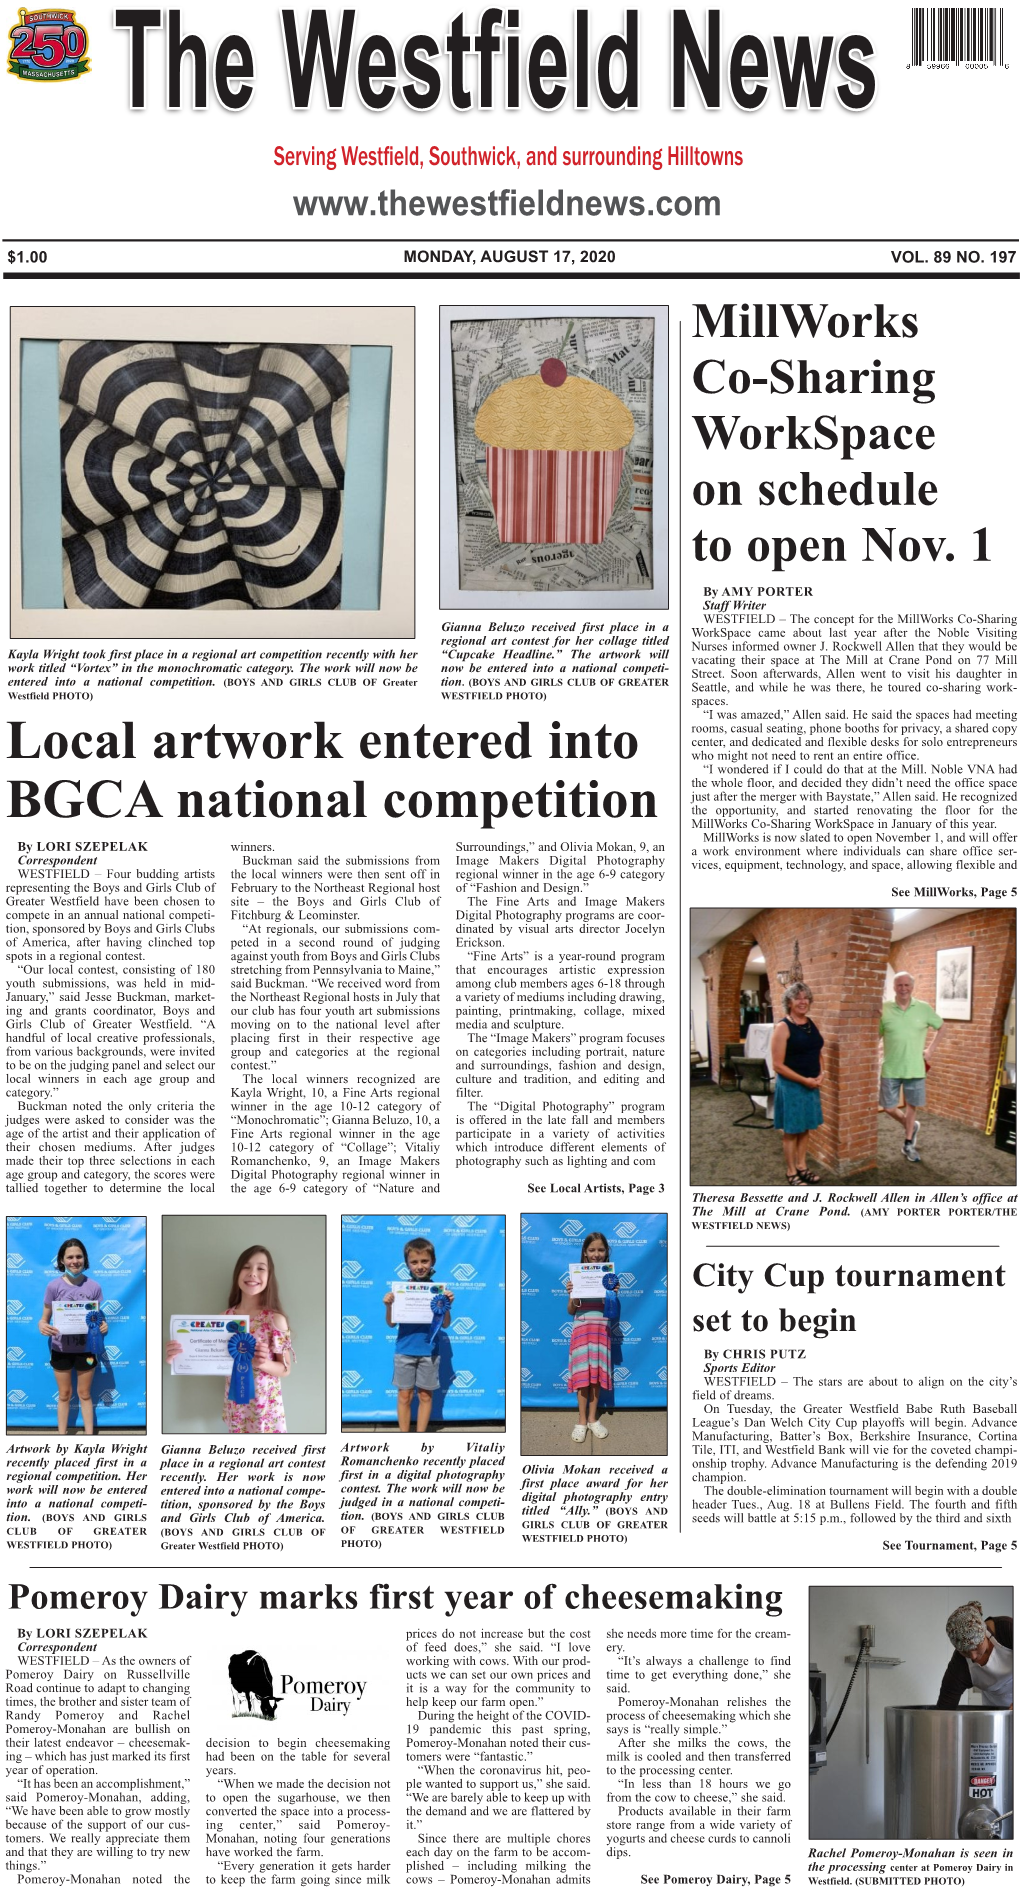 Local Artwork Entered Into BGCA National Competition